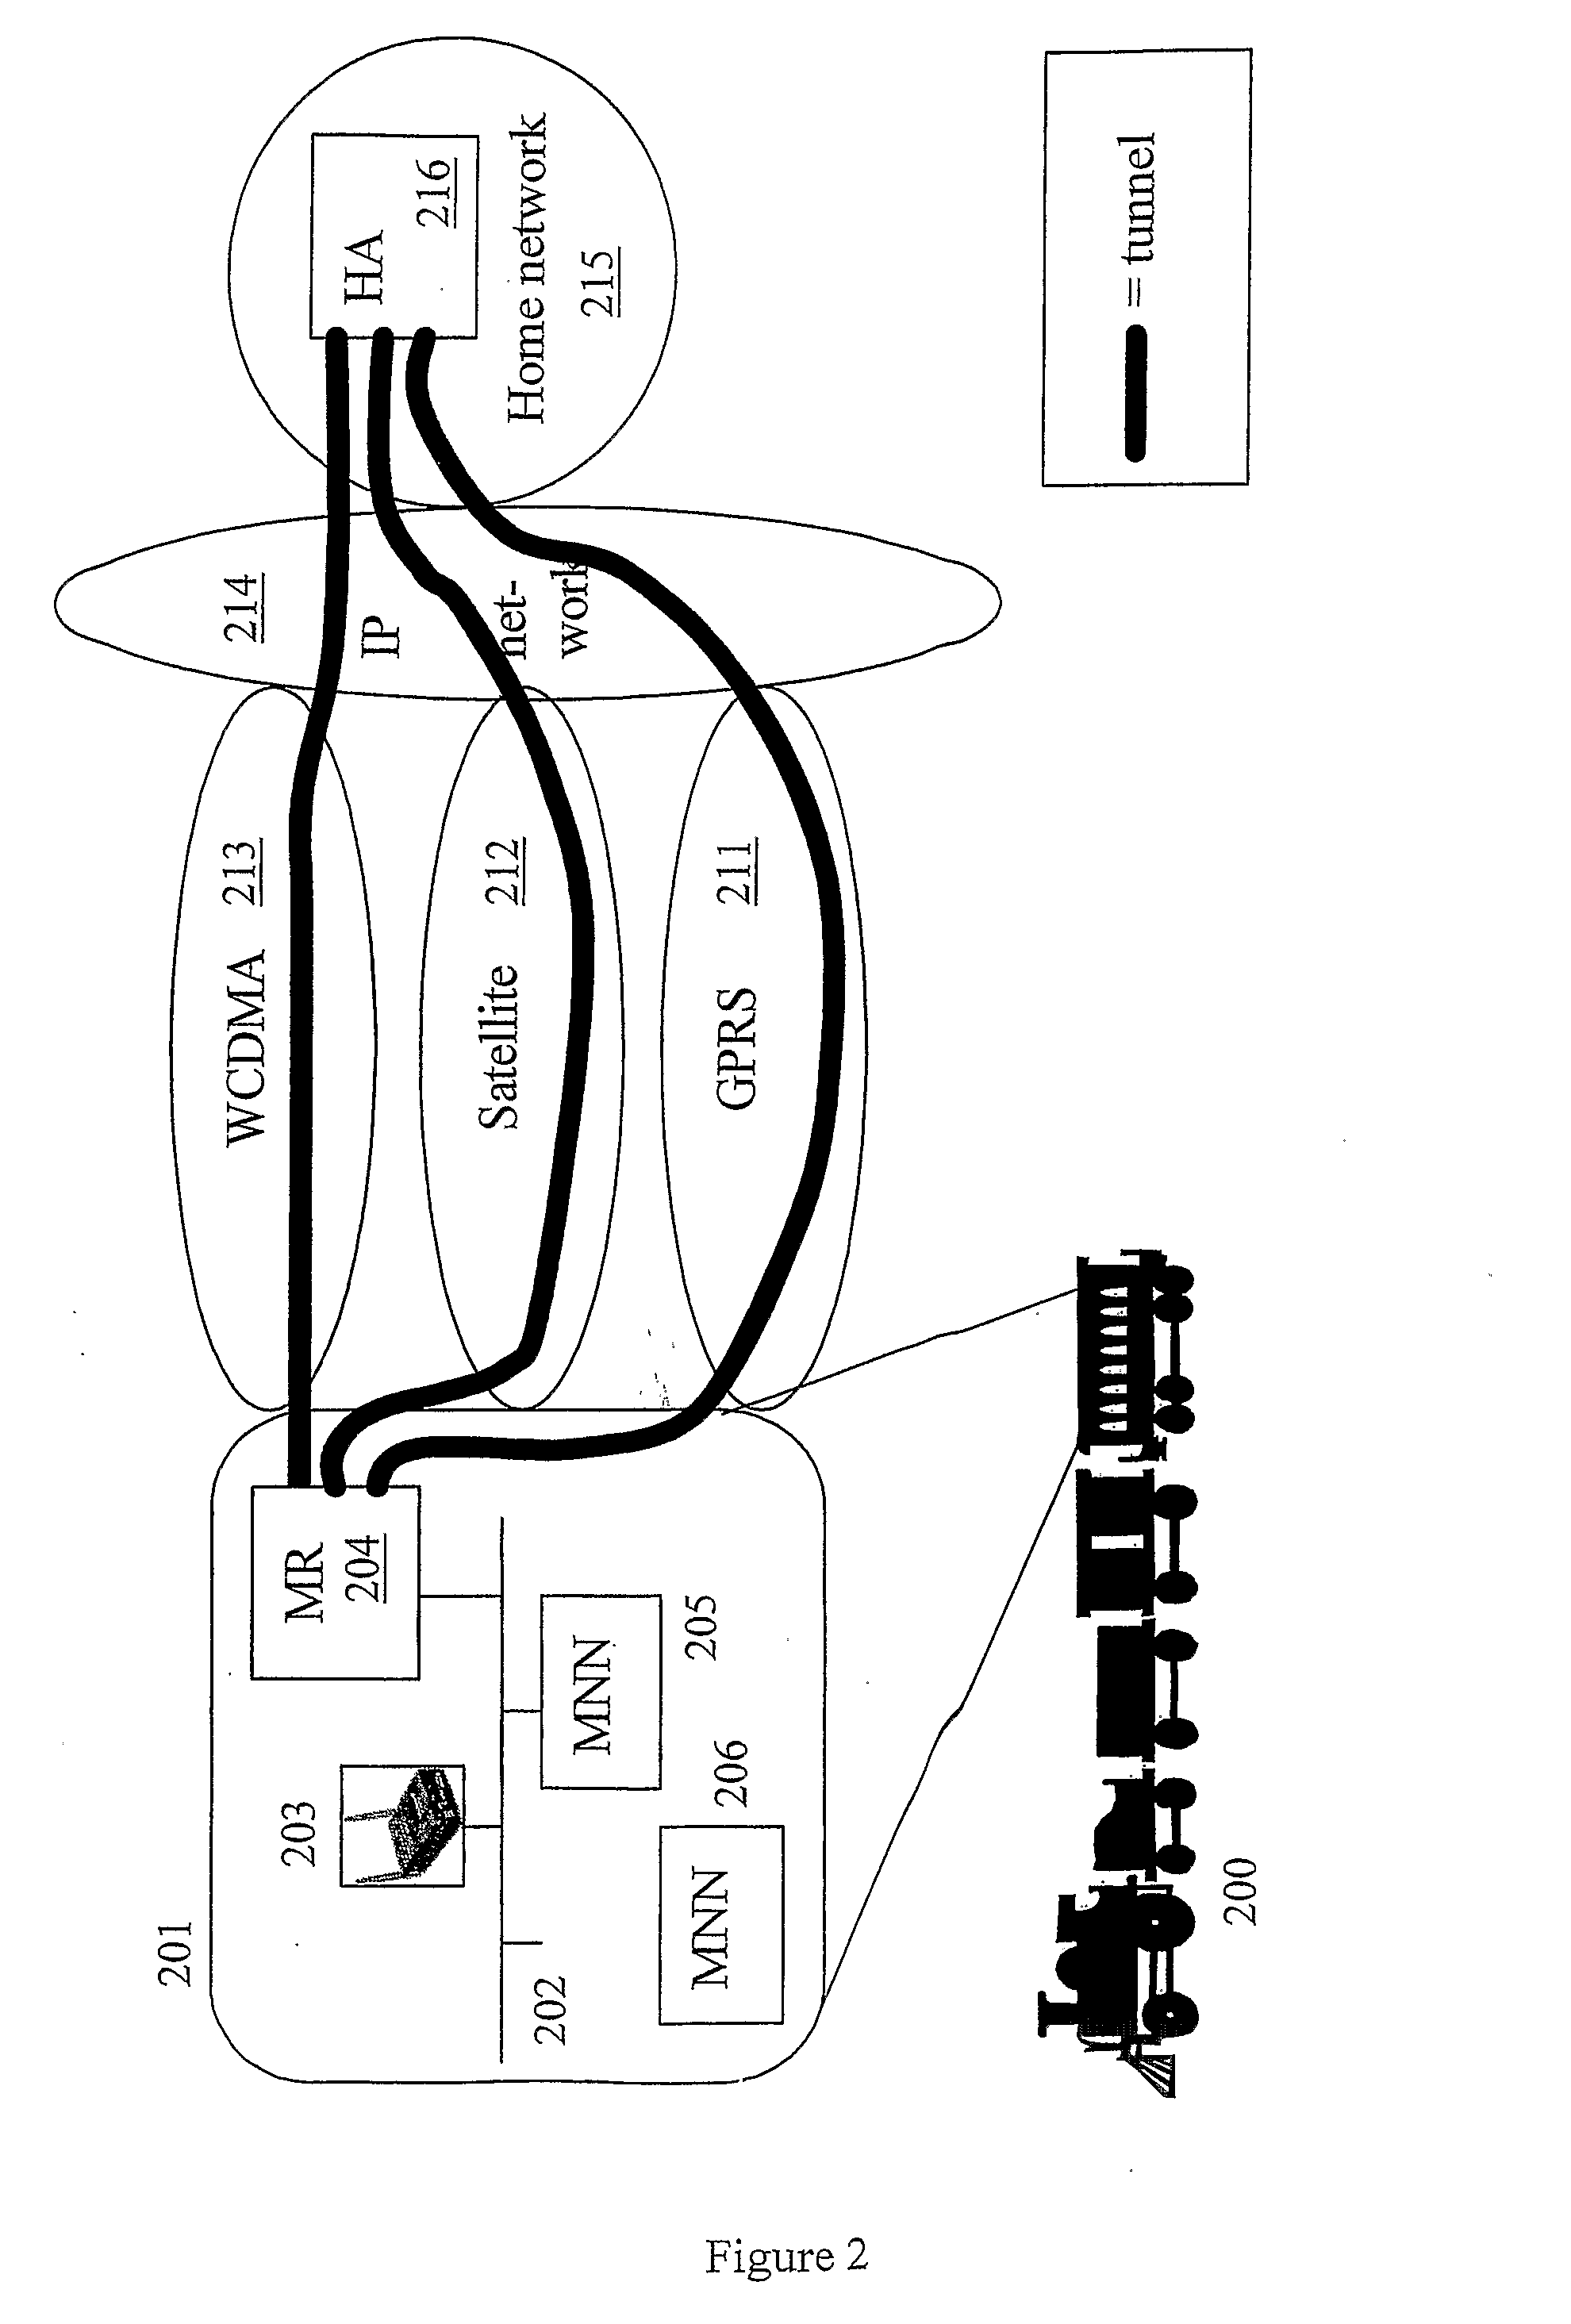 Methods and Nodes in a Communication System for Controlling the Use of Access Resources